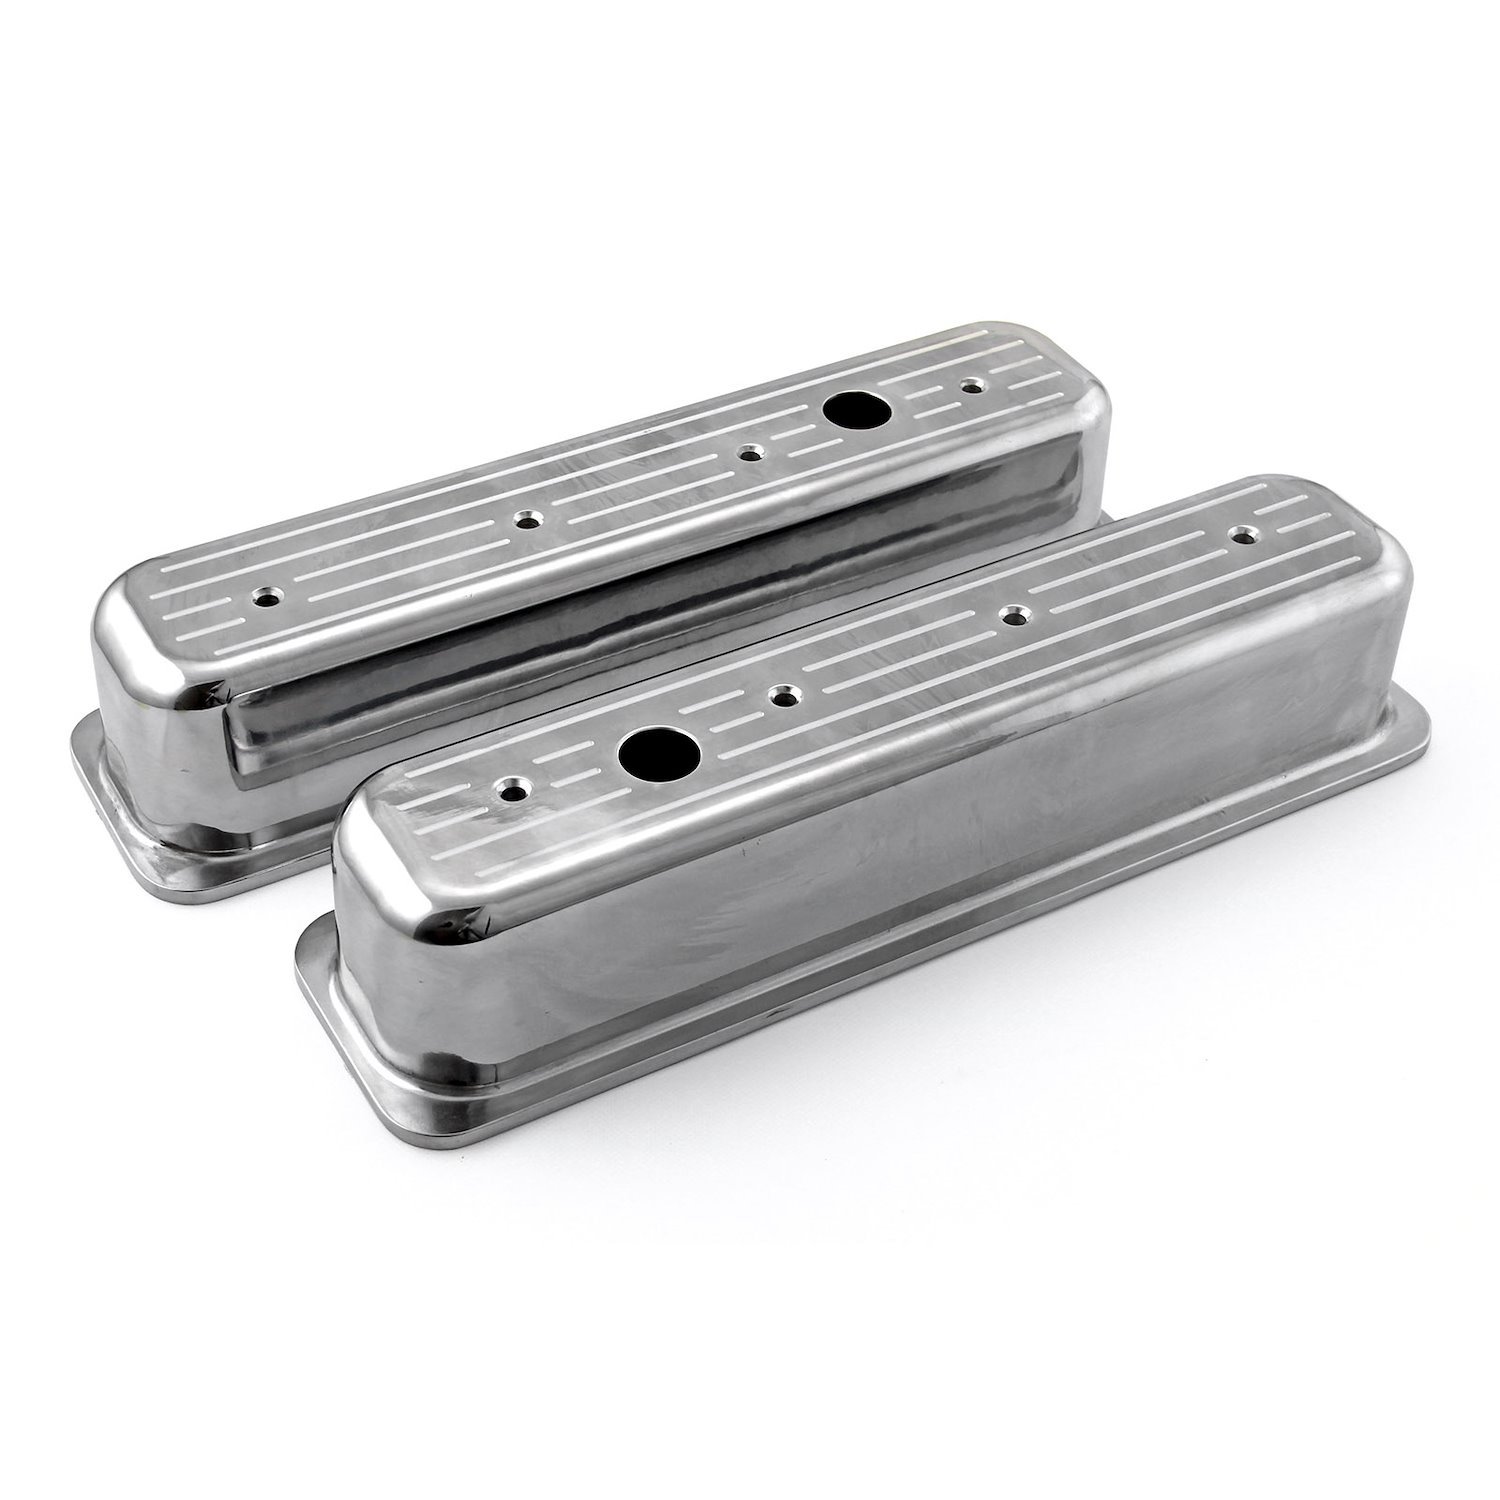 PCE314.1075.03 Chevy SBC 350 Center Bolt Polished Aluminum Ball Milled Valve Covers Tall w/Hole